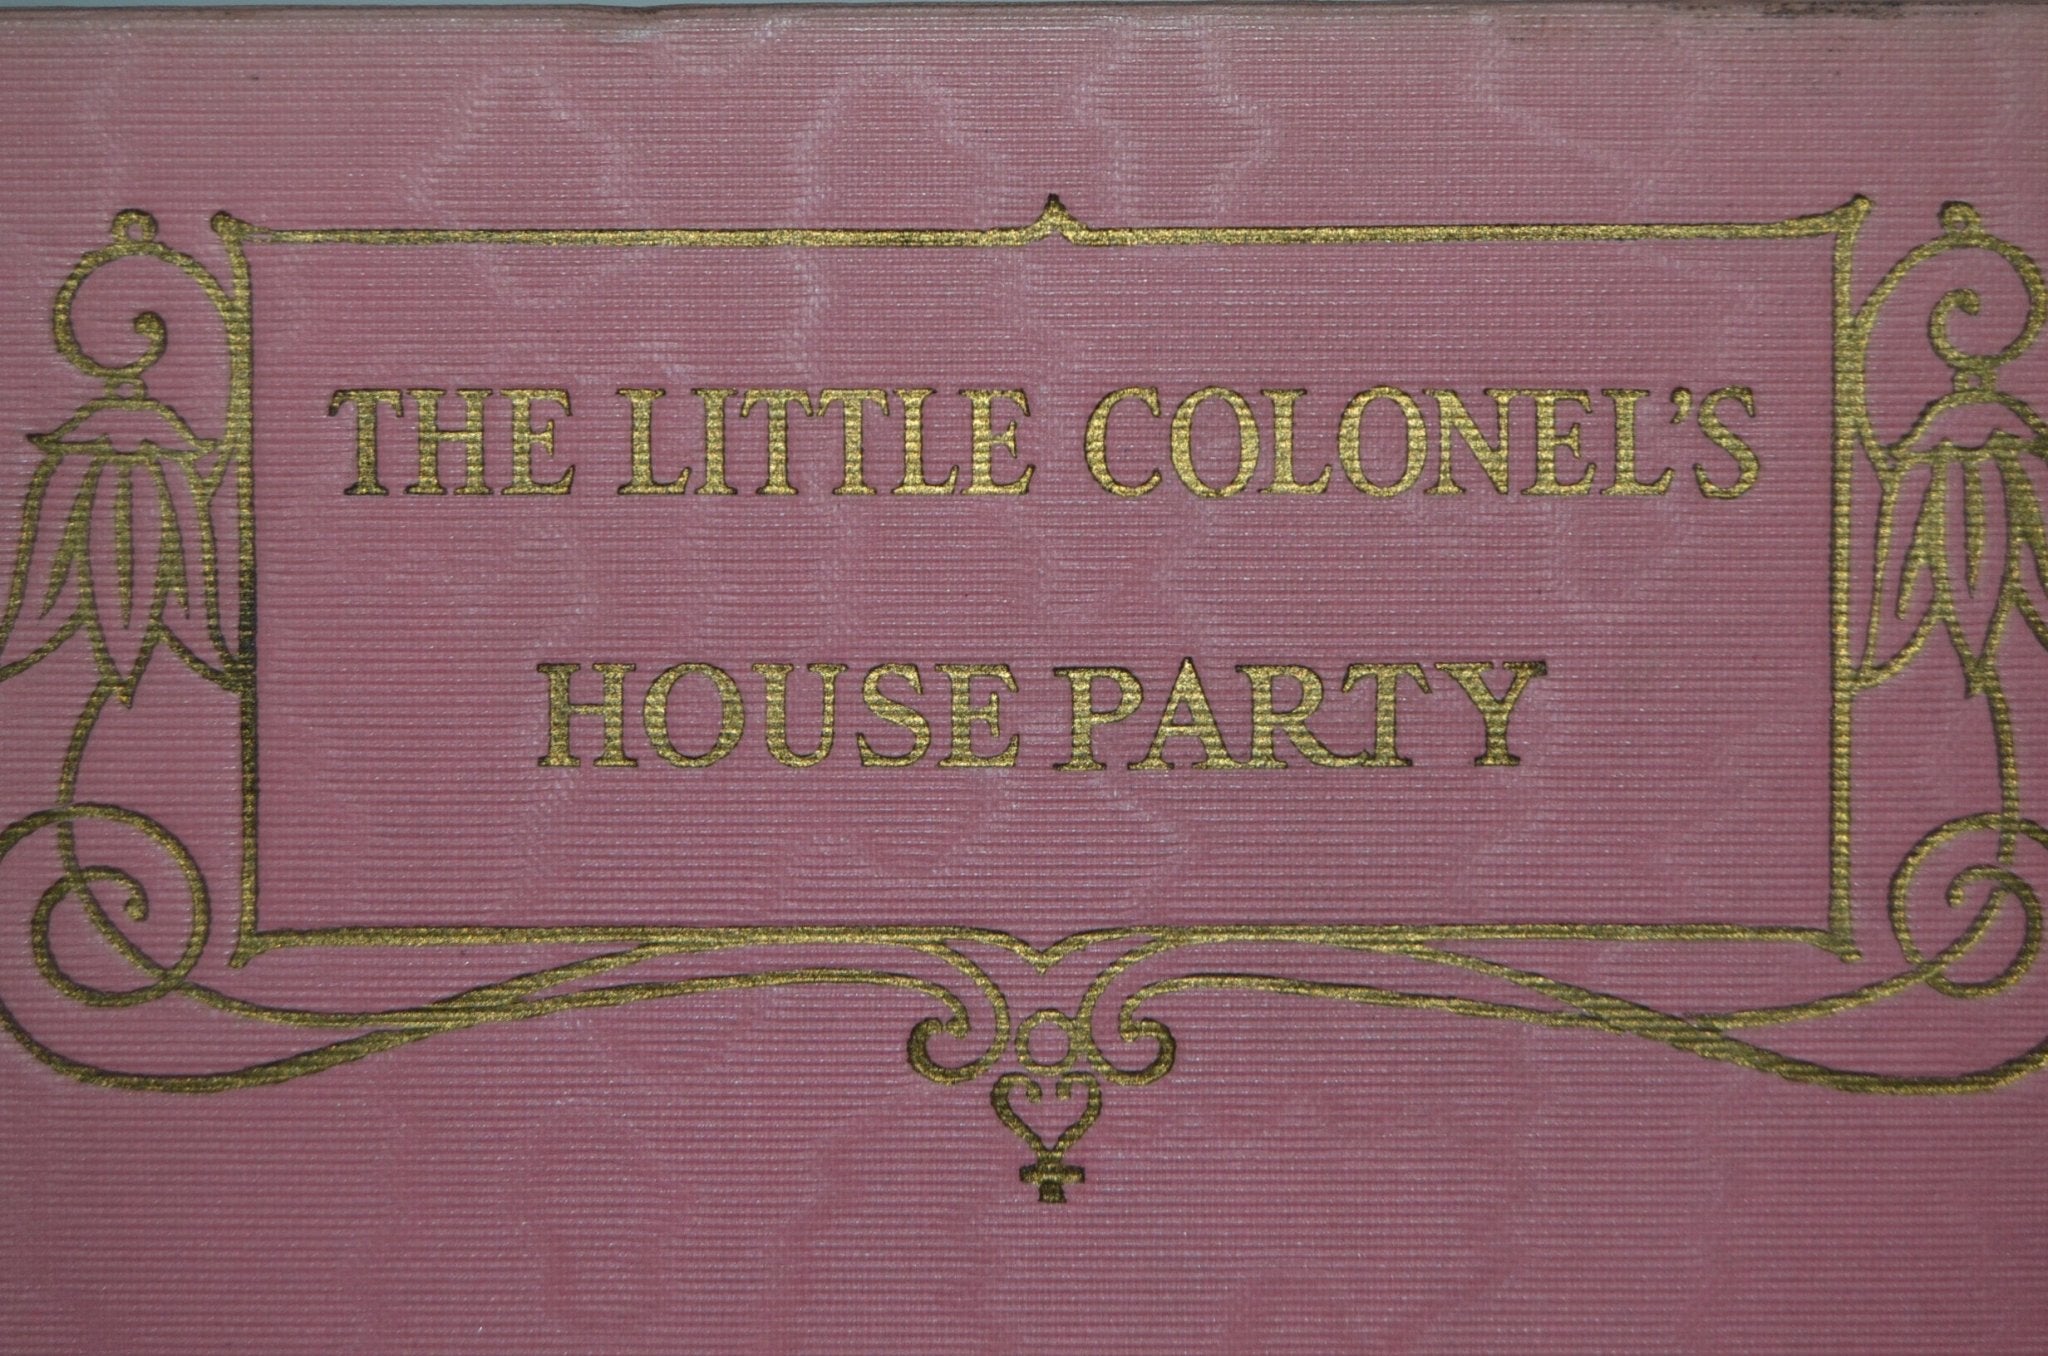 Antique Cloth Bound Book Décor – The Little Colonel Series by Annie Fellows Johnson – Pink & Beige - Brookfield Books